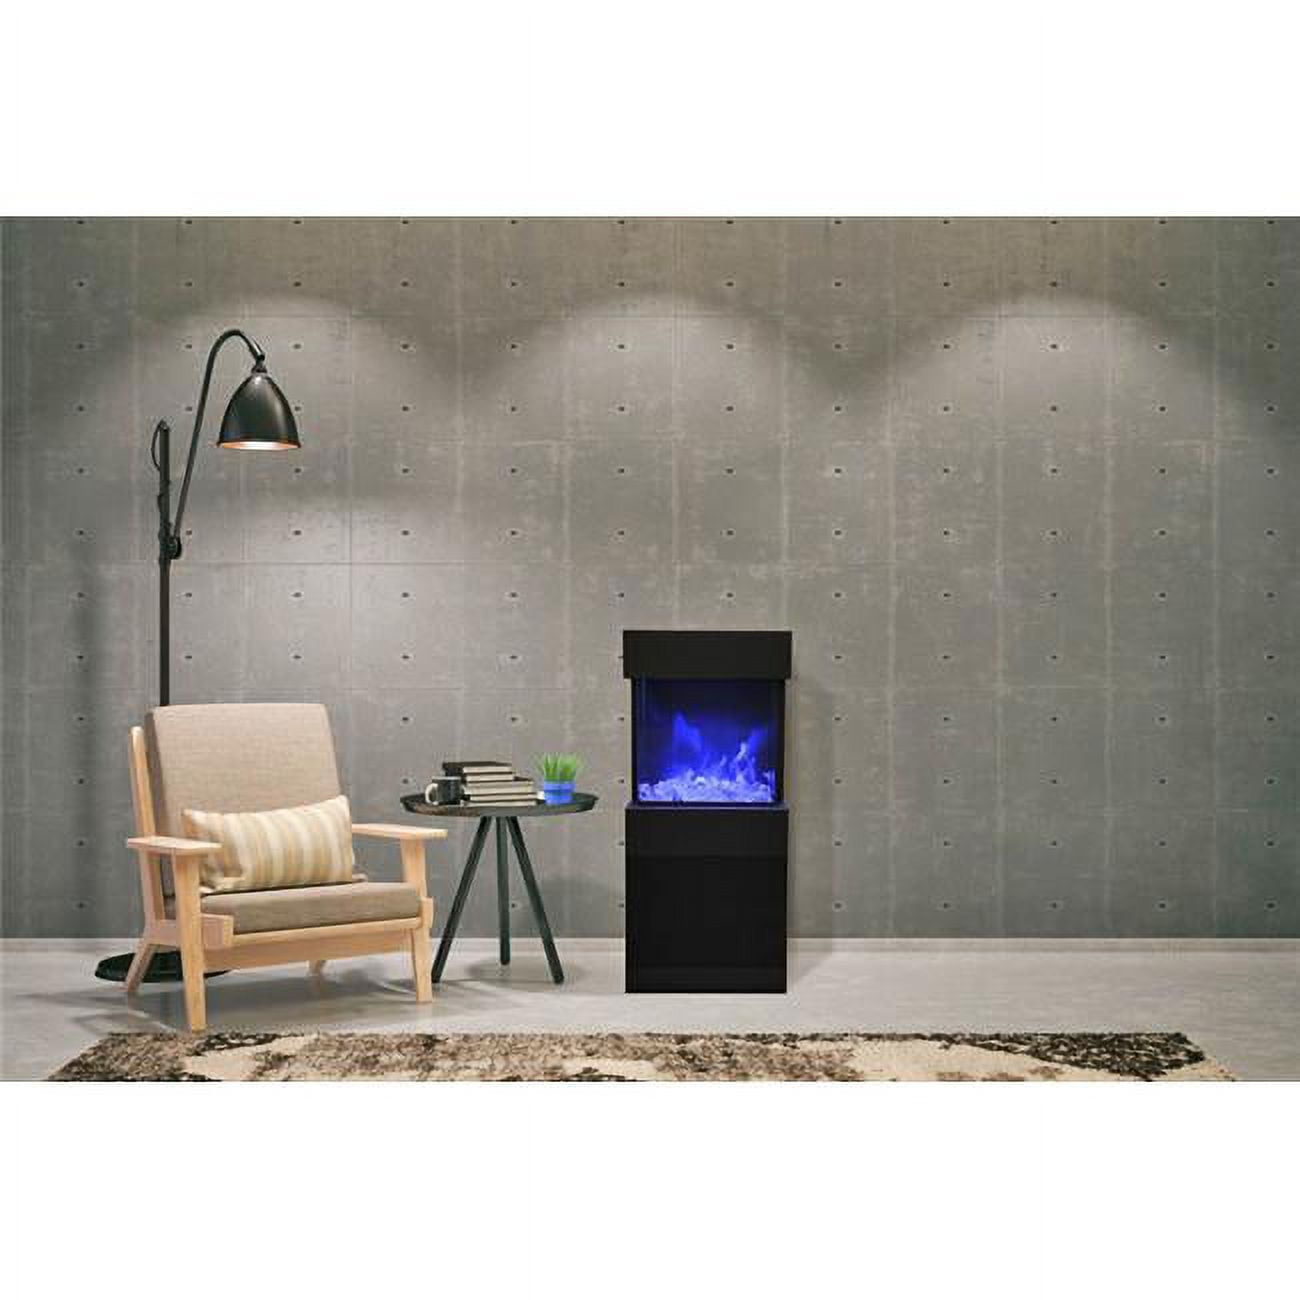 Cube-2025wm 11.75 X 25 In. 3 Sided Glass Fireplace